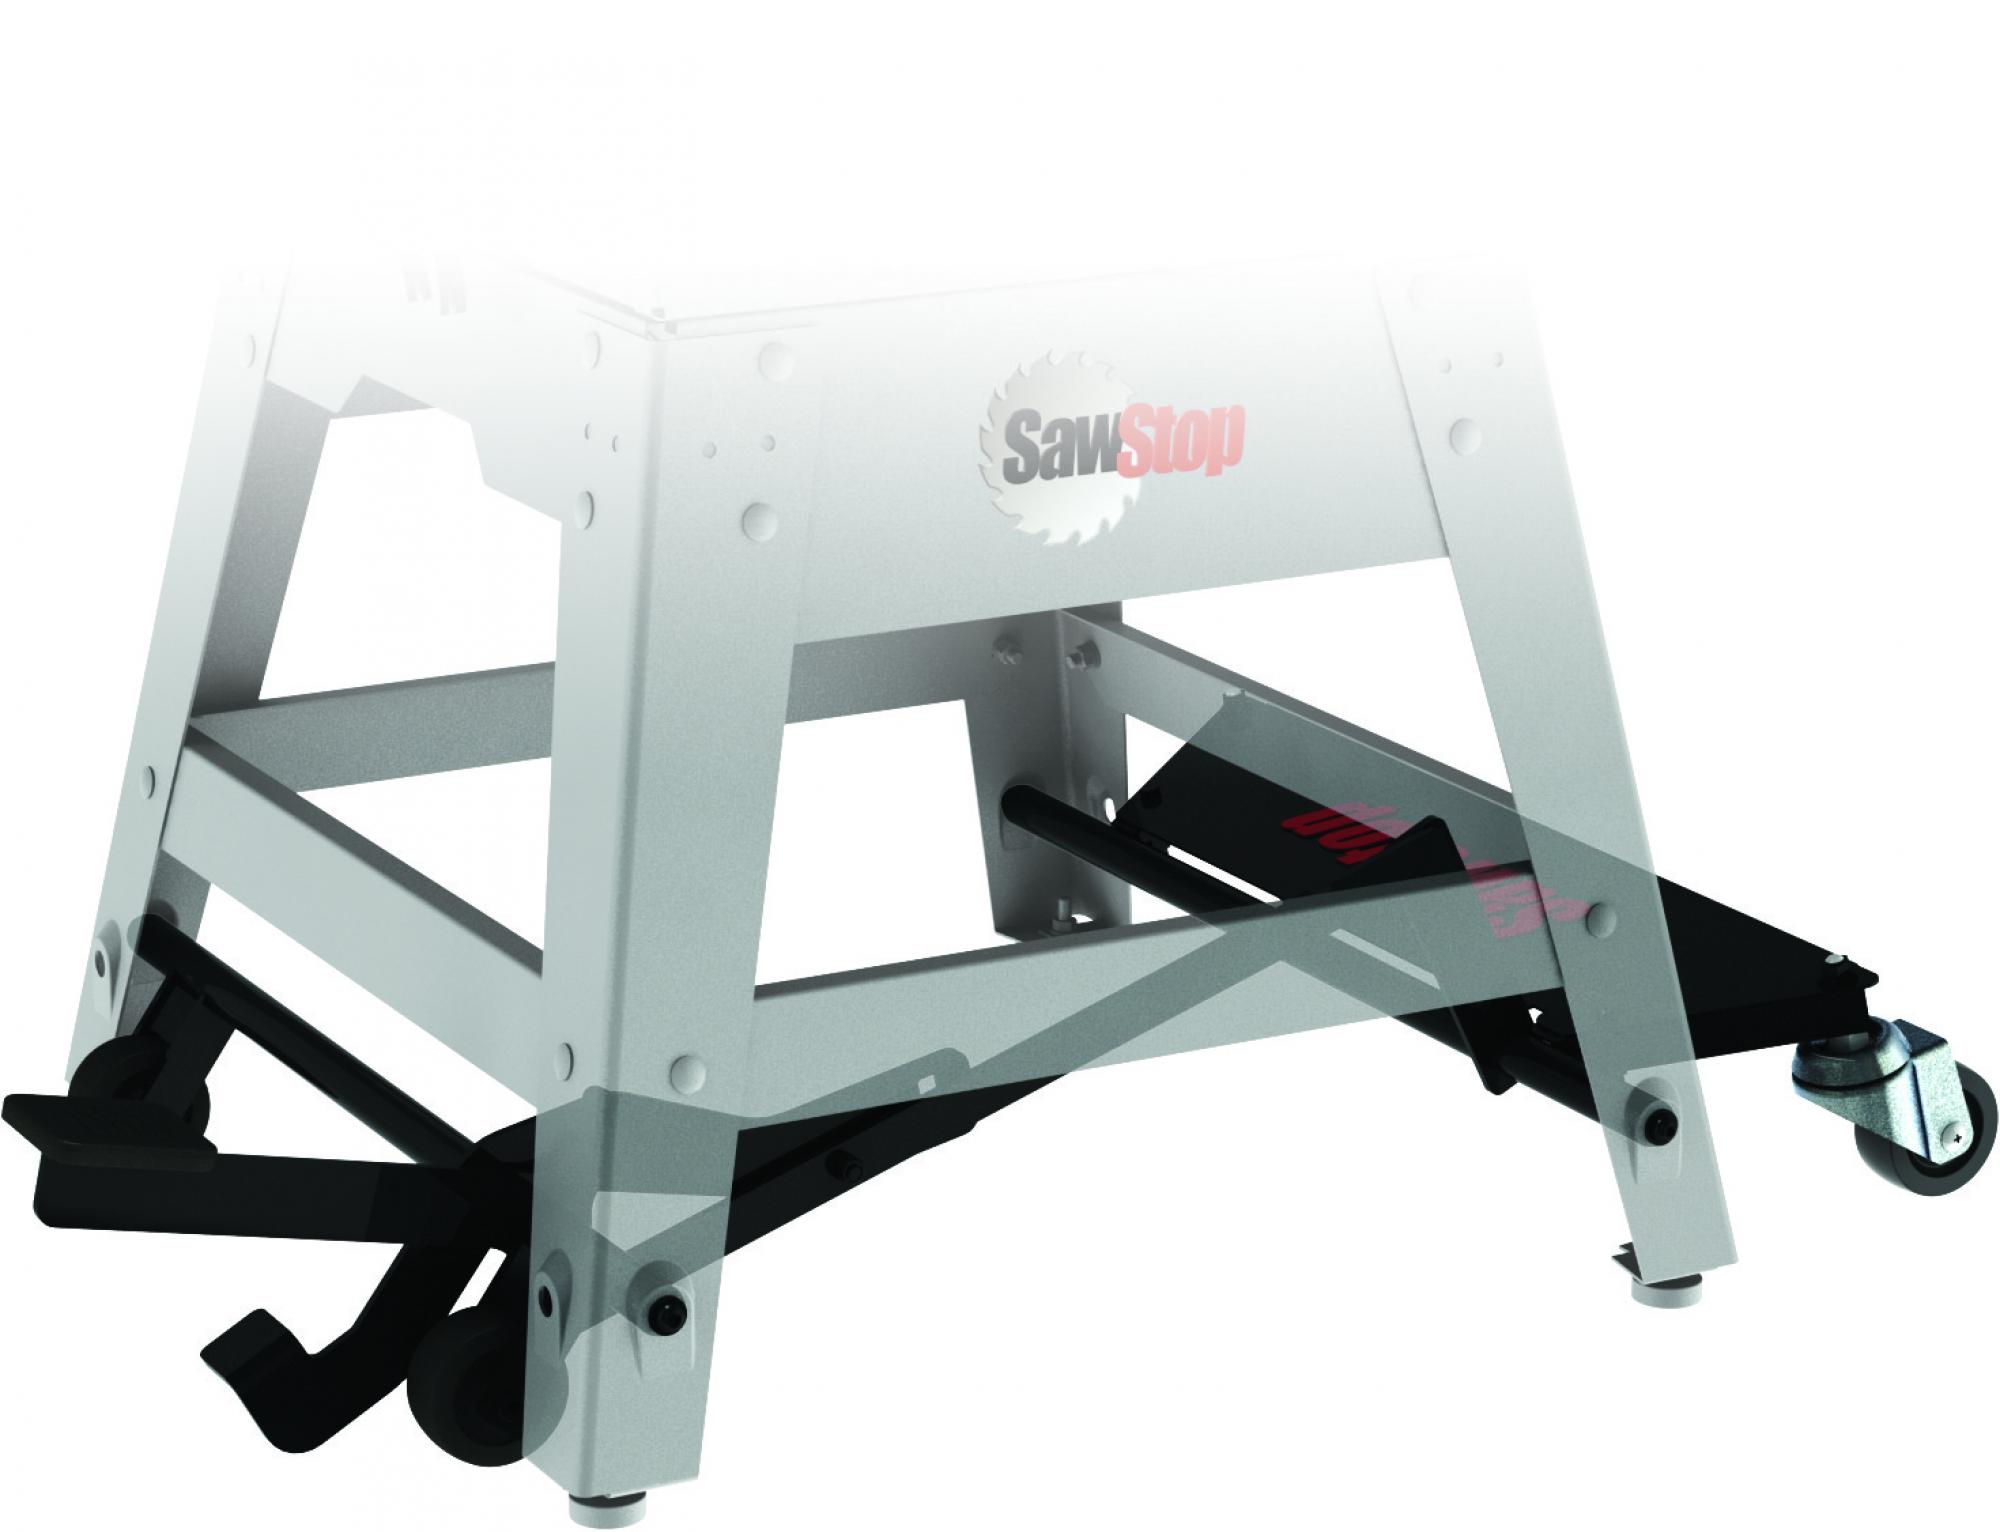 Contractor Saw Mobile Base (MB-CNS-000)| SawStop